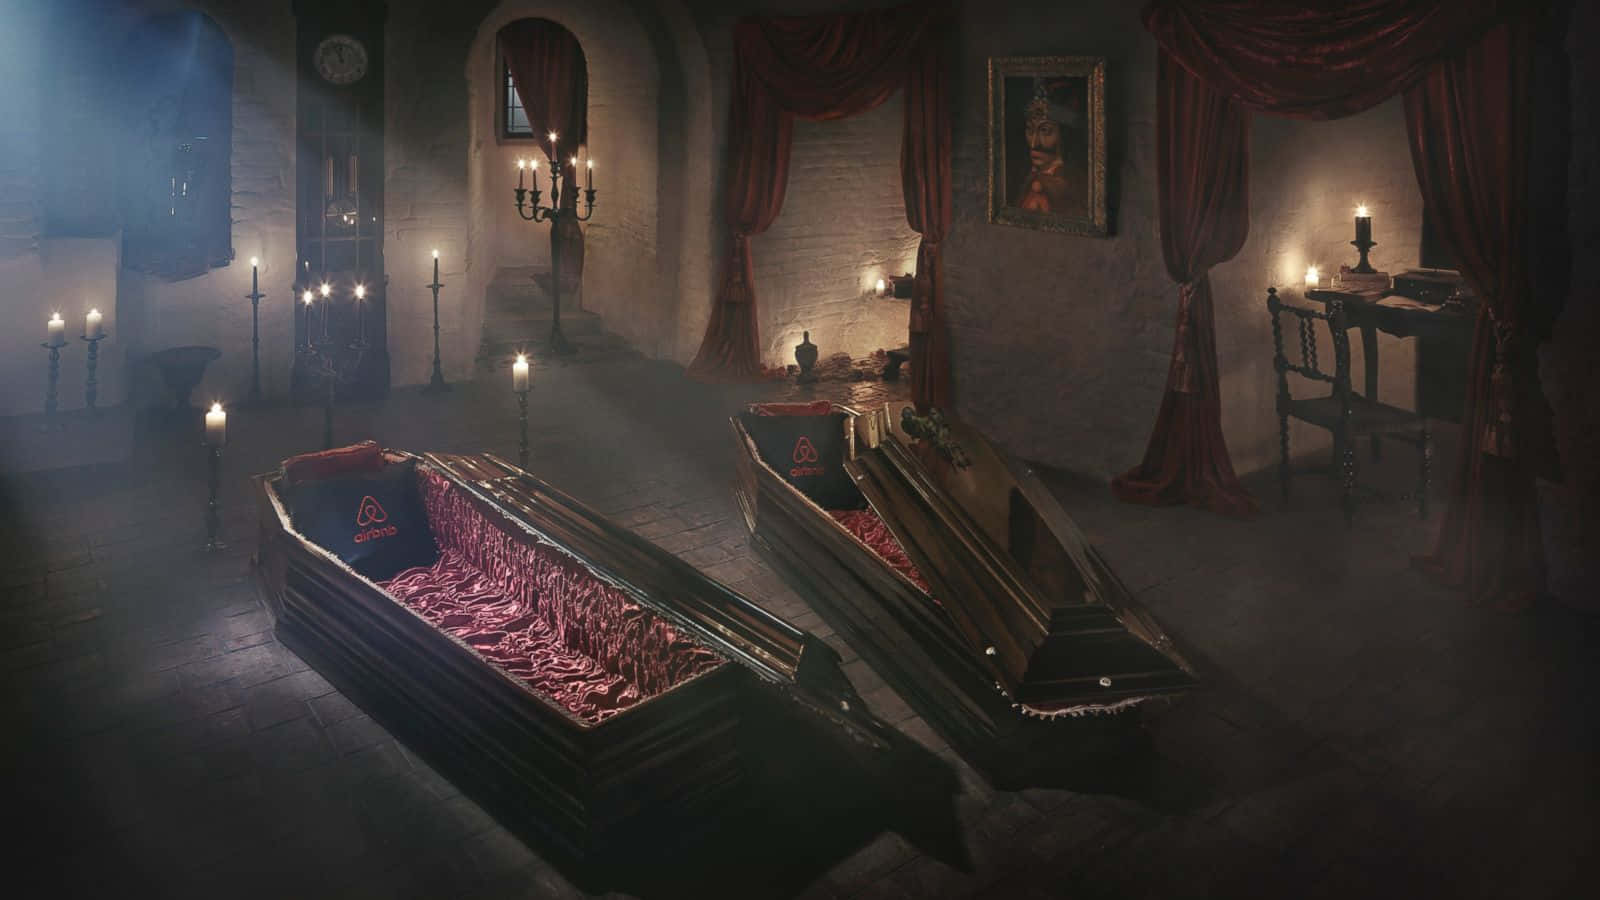 Get ready for a frighteningly fun Halloween night with this spooky coffin Wallpaper